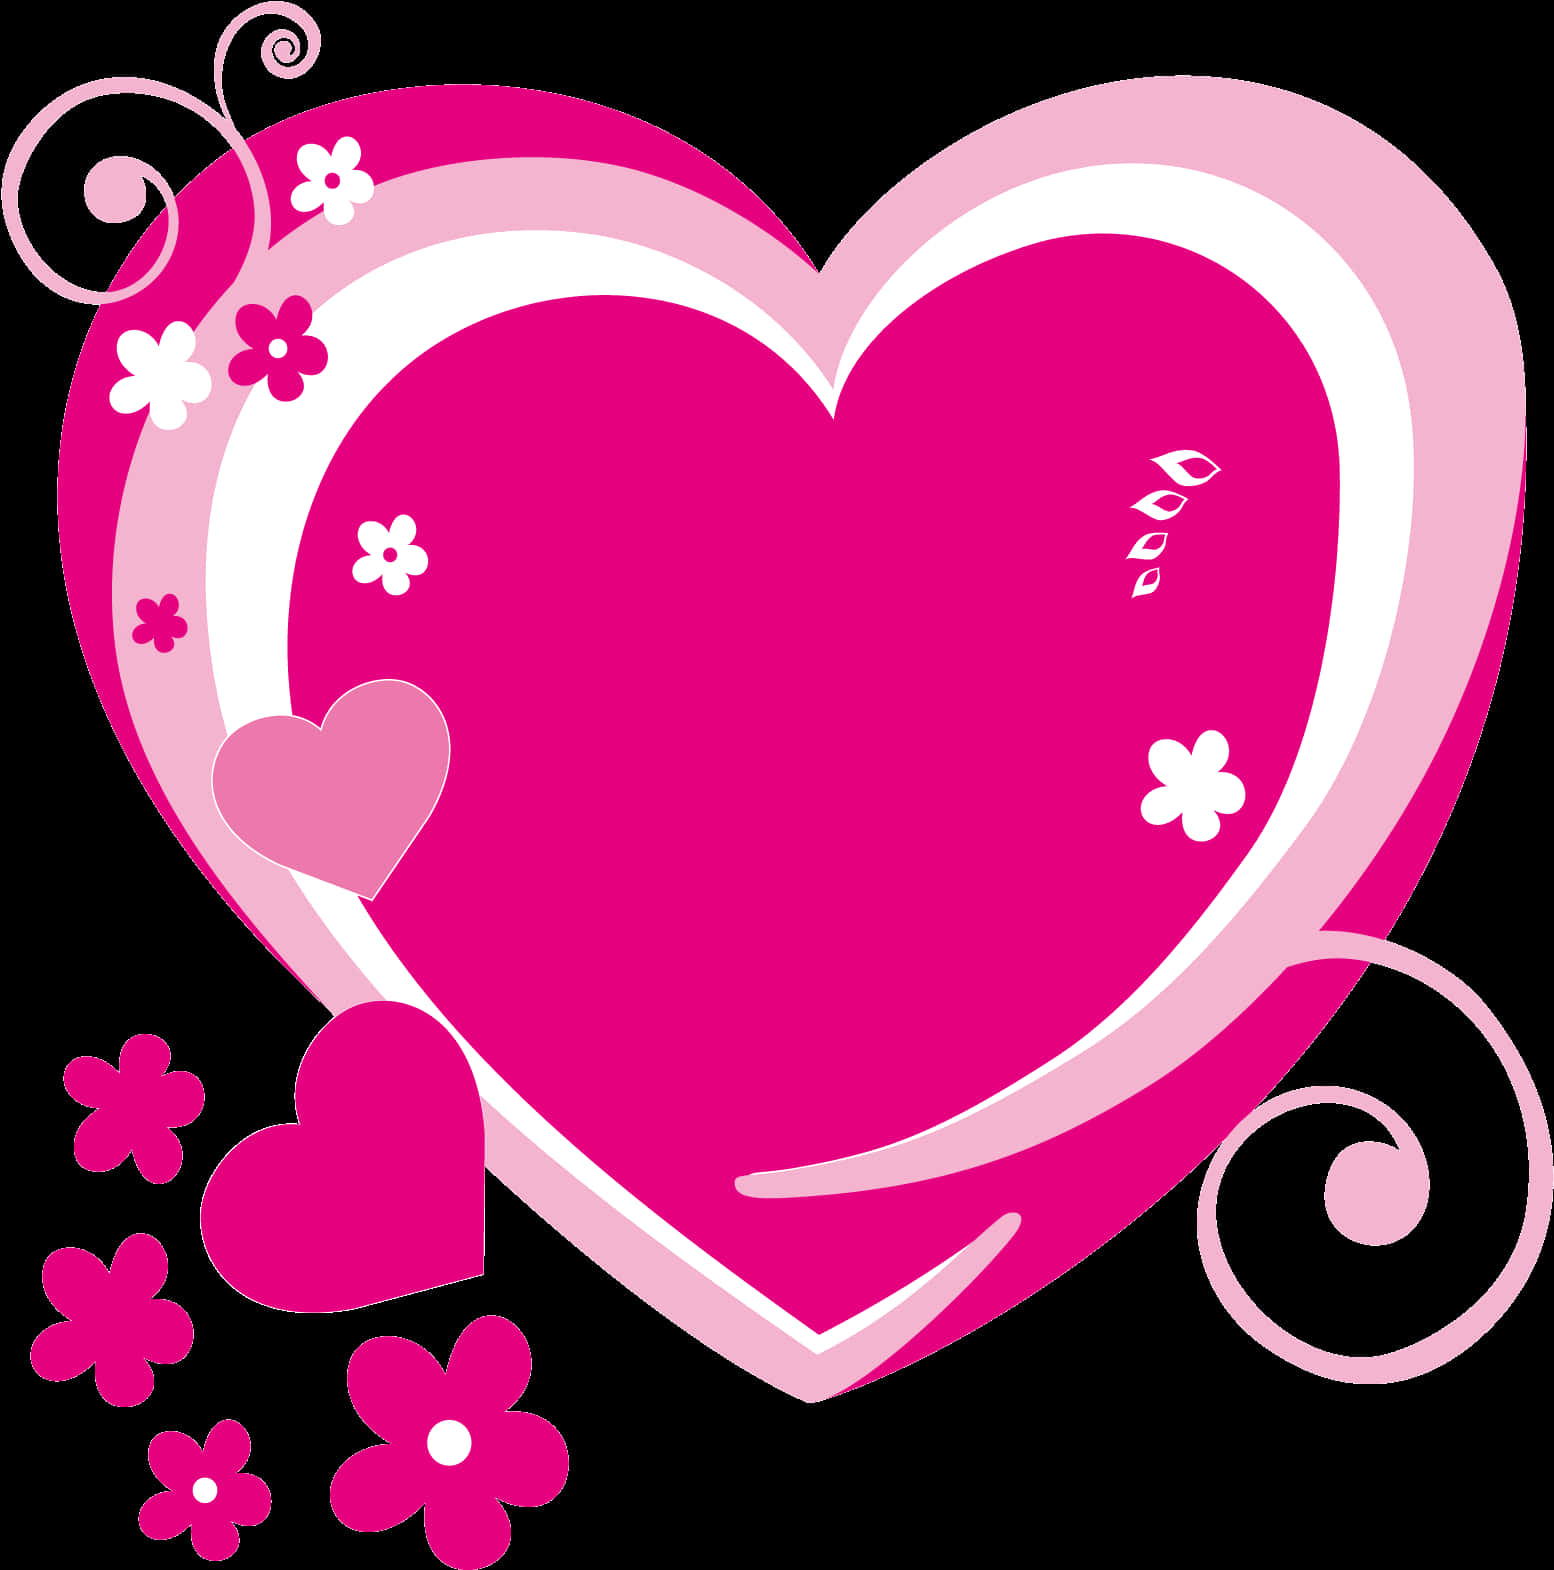 Pink Heart Clipartwith Floral Designs PNG